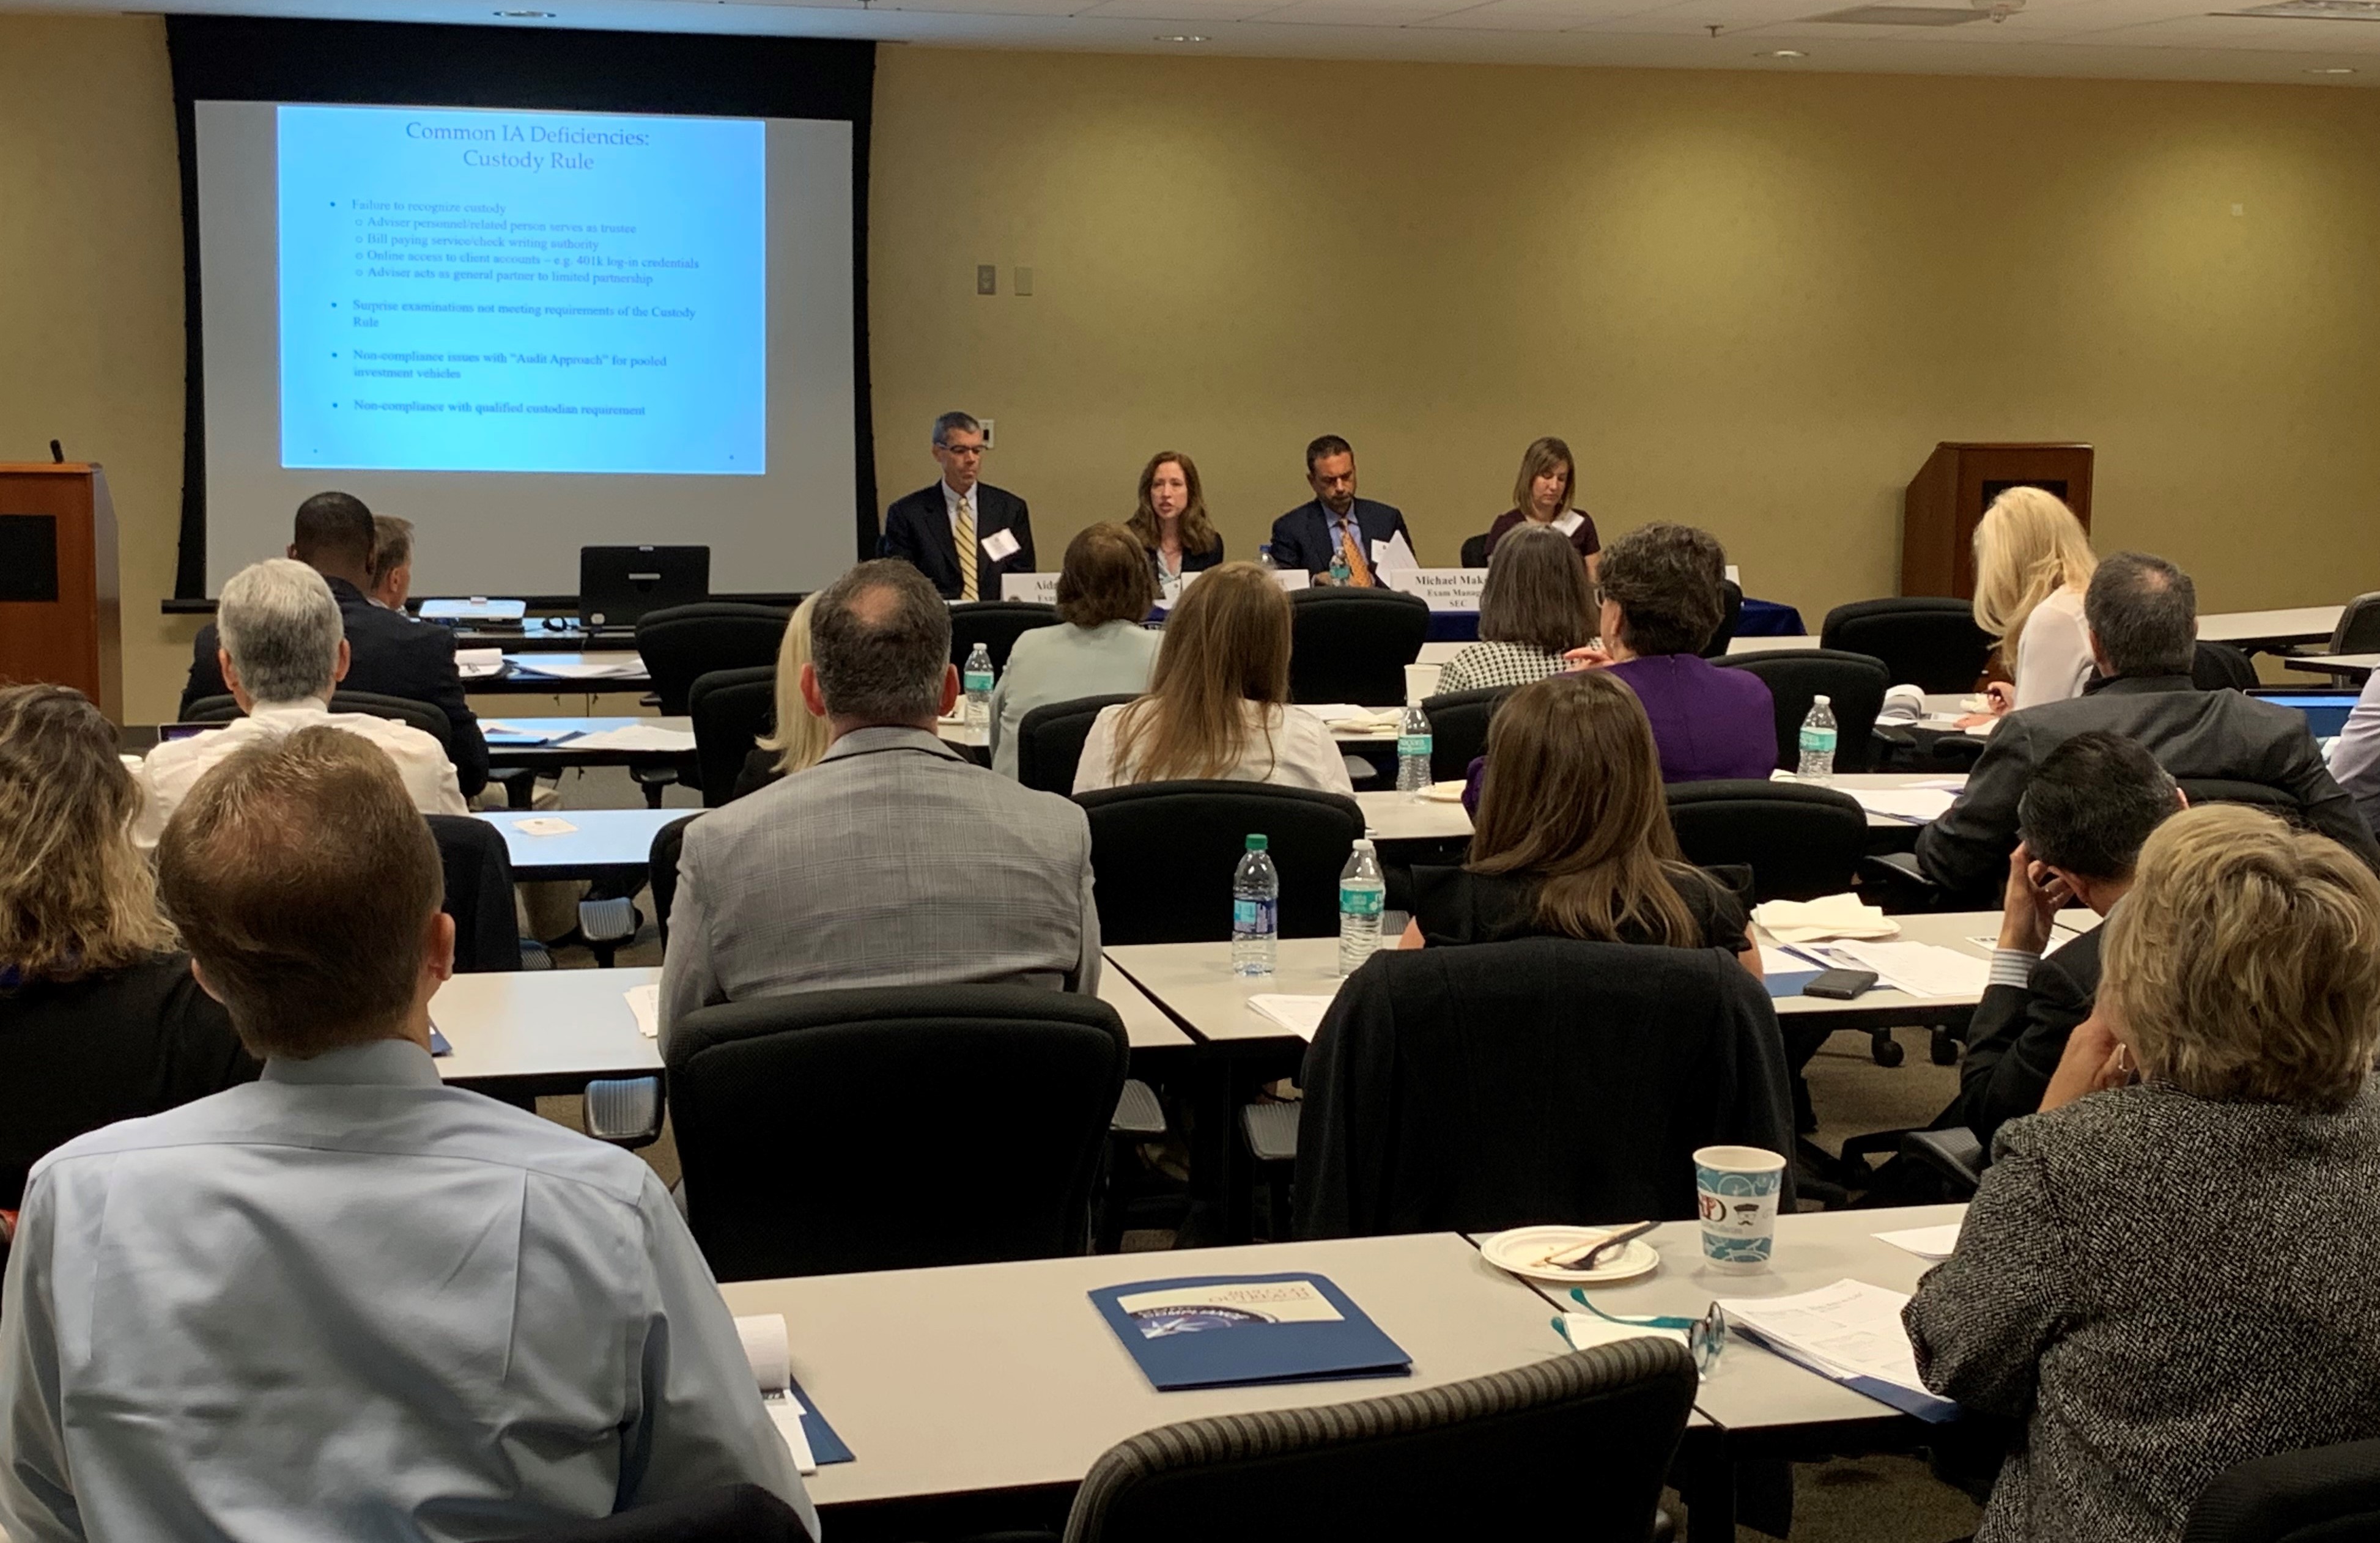 SEC Philadelphia Office hosted a Chief Compliance Officer Outreach event in Pittsburgh on May 16, 2019